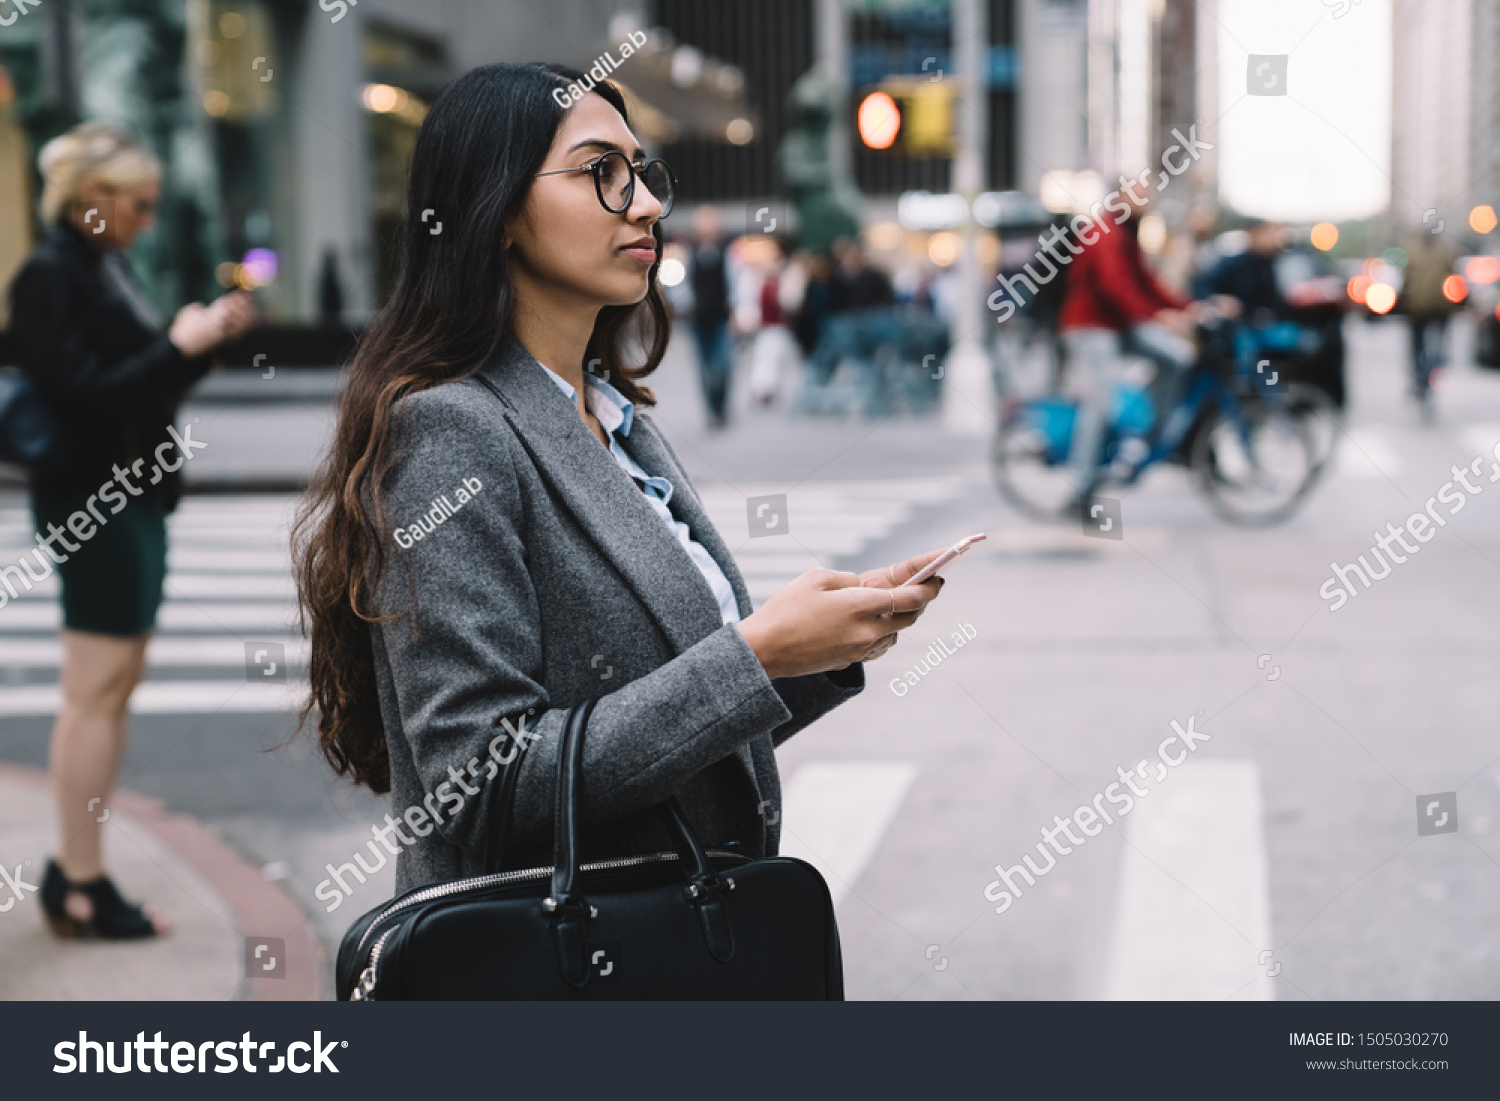 Side view of young businesswoman in office wear and glasses using mobile phone while crossing street in New York City  #1505030270